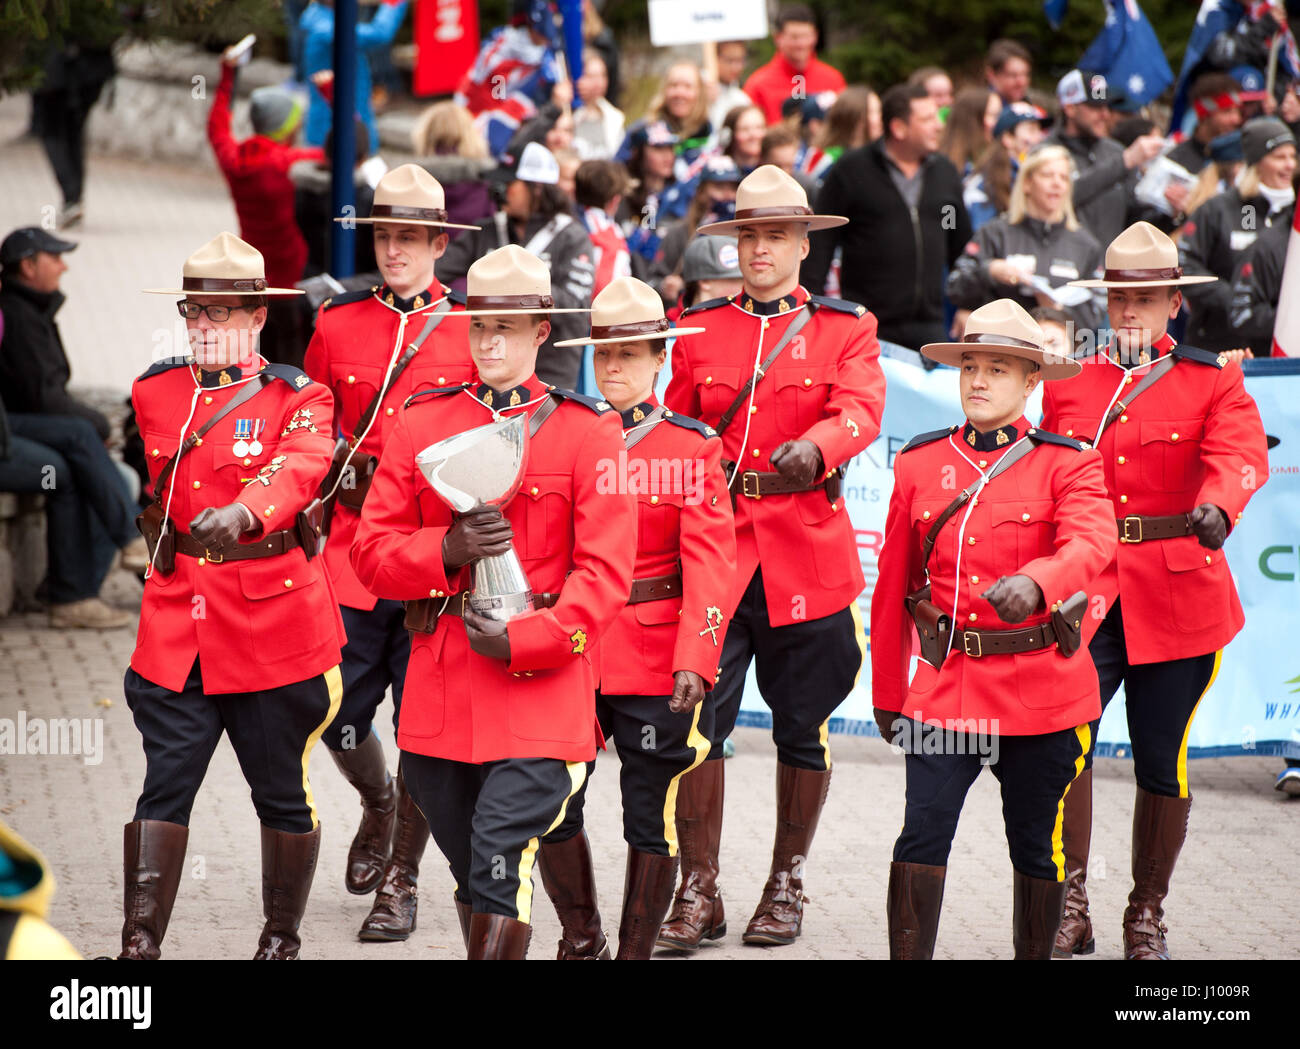 Royal Canadian Mounted Police oder RCMP Offiziere in traditioneller Kleidung rot Serge Uniformen parade während der Canada-Cup.  Whistler BC, Kanada. Stockfoto